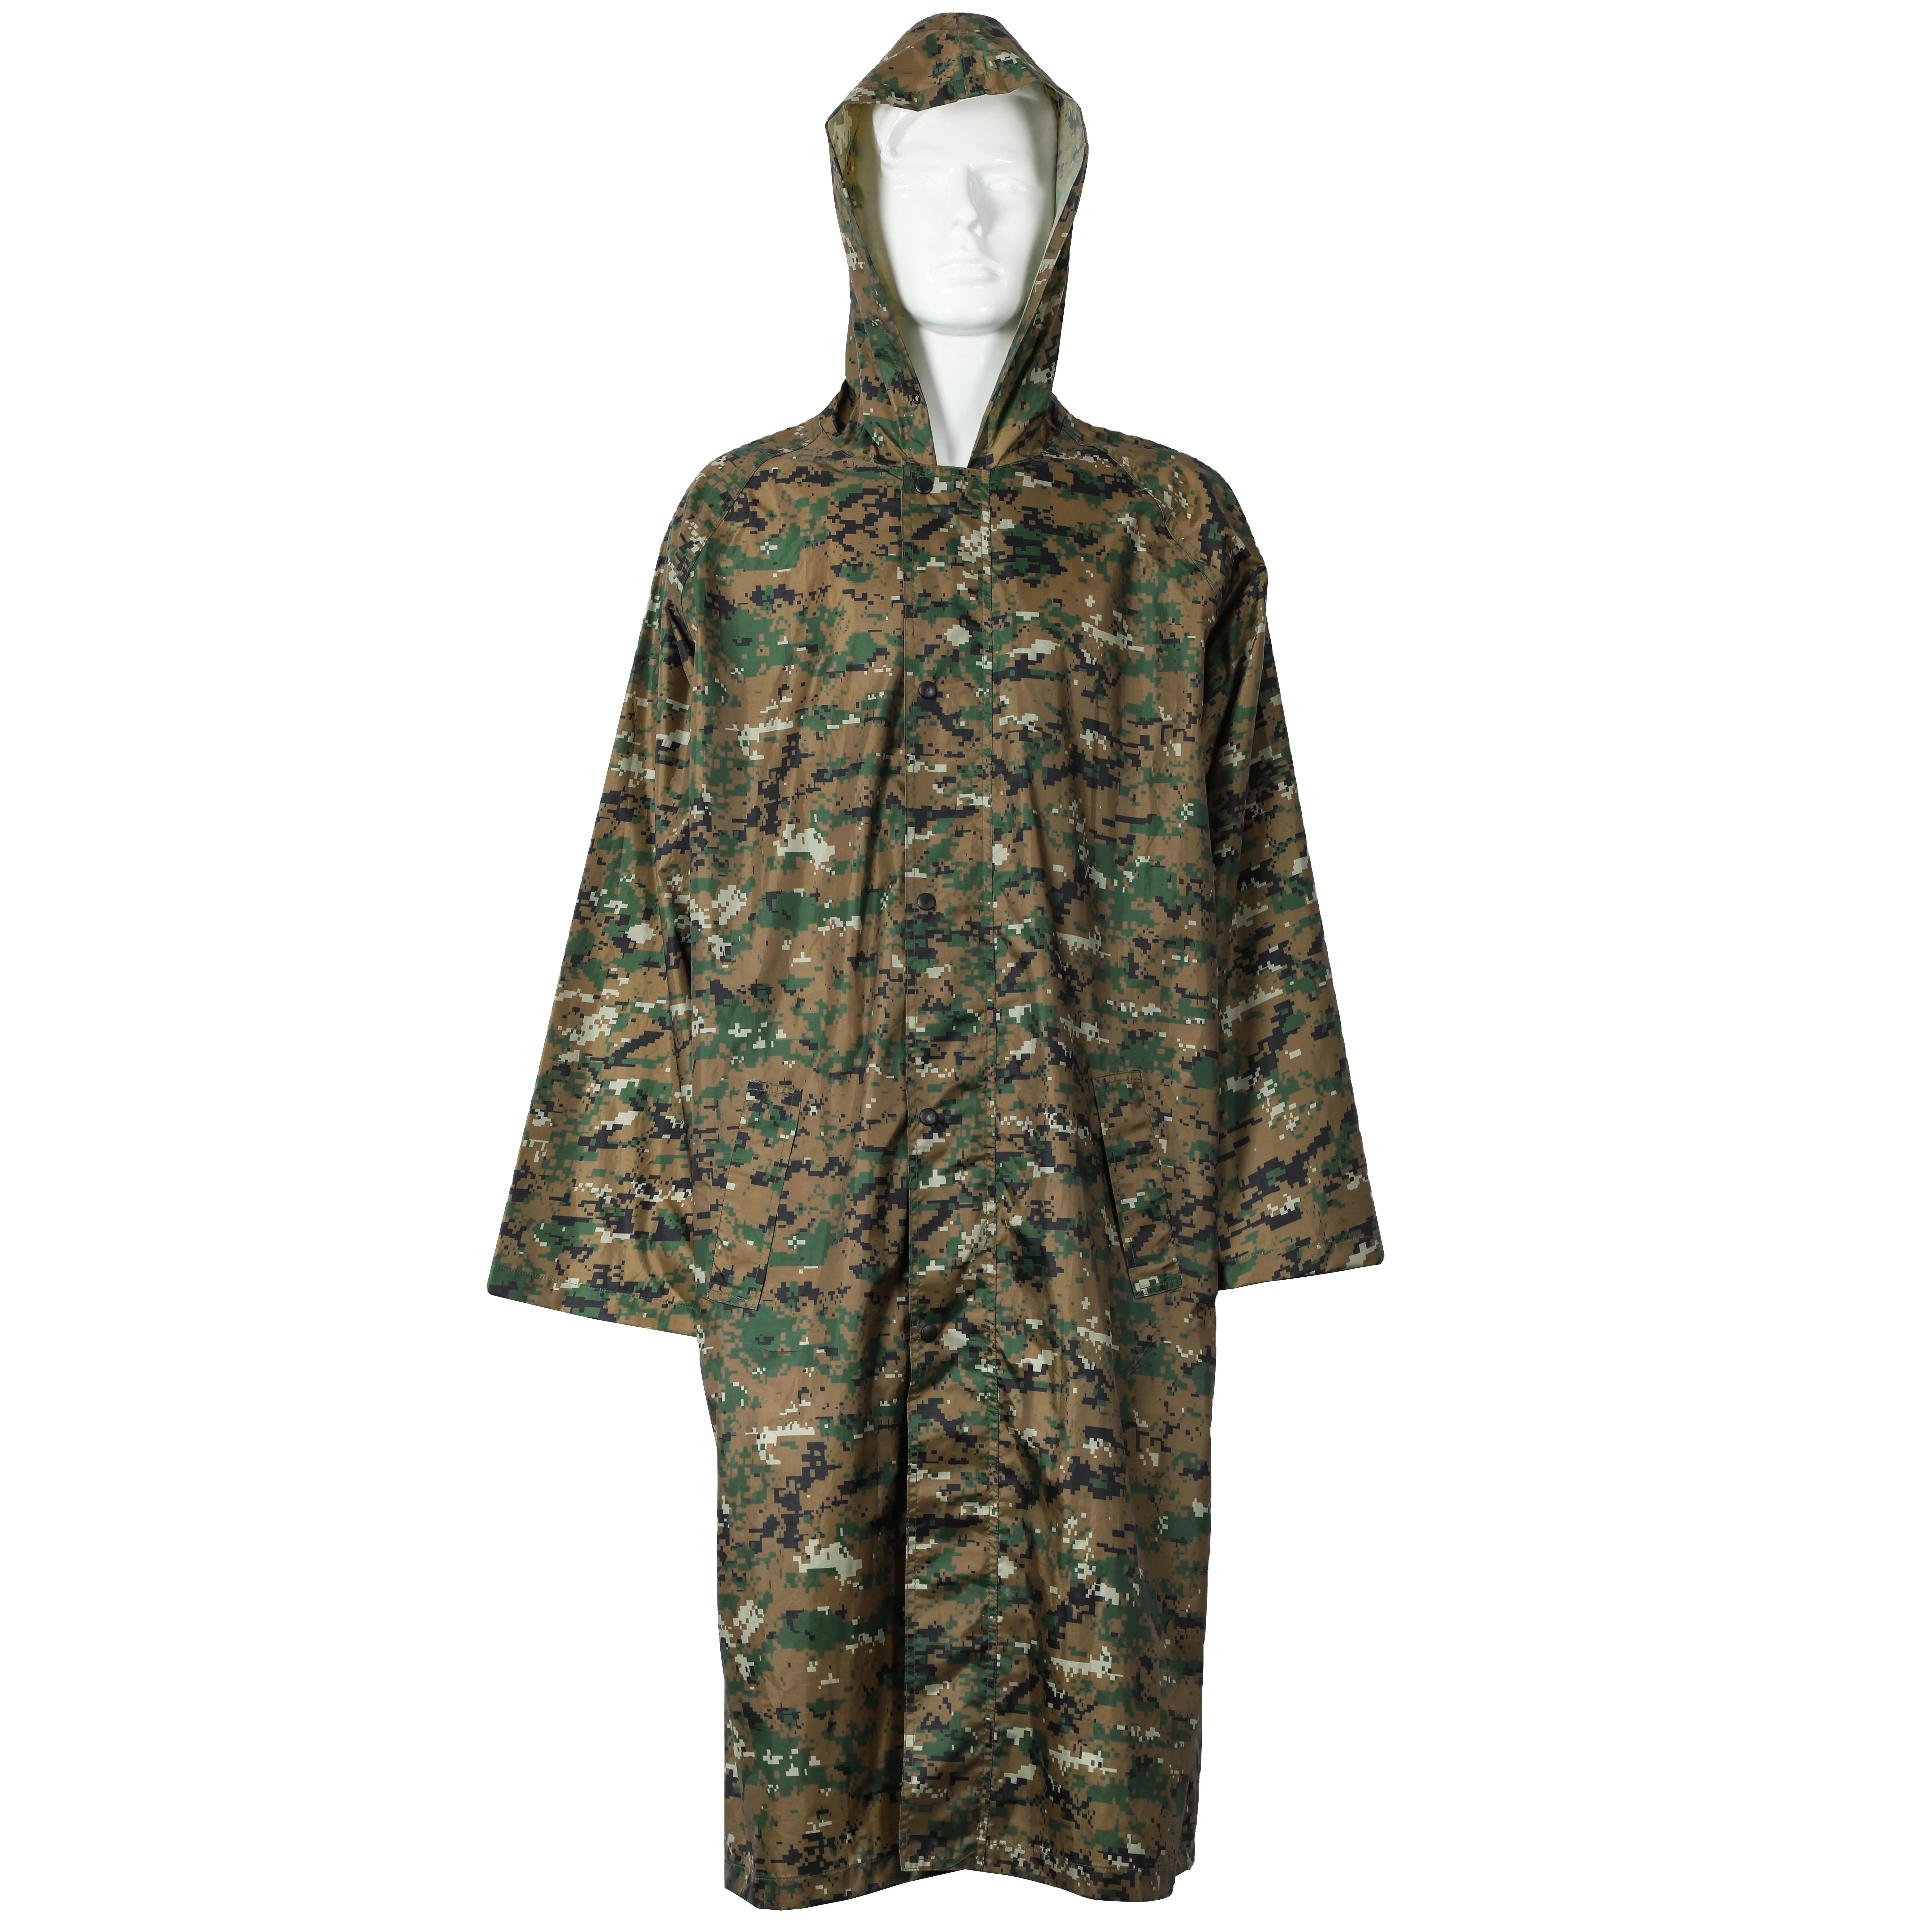 100% Polyester Light-weight Camouflage Tactical Raincoat with PVC Coating